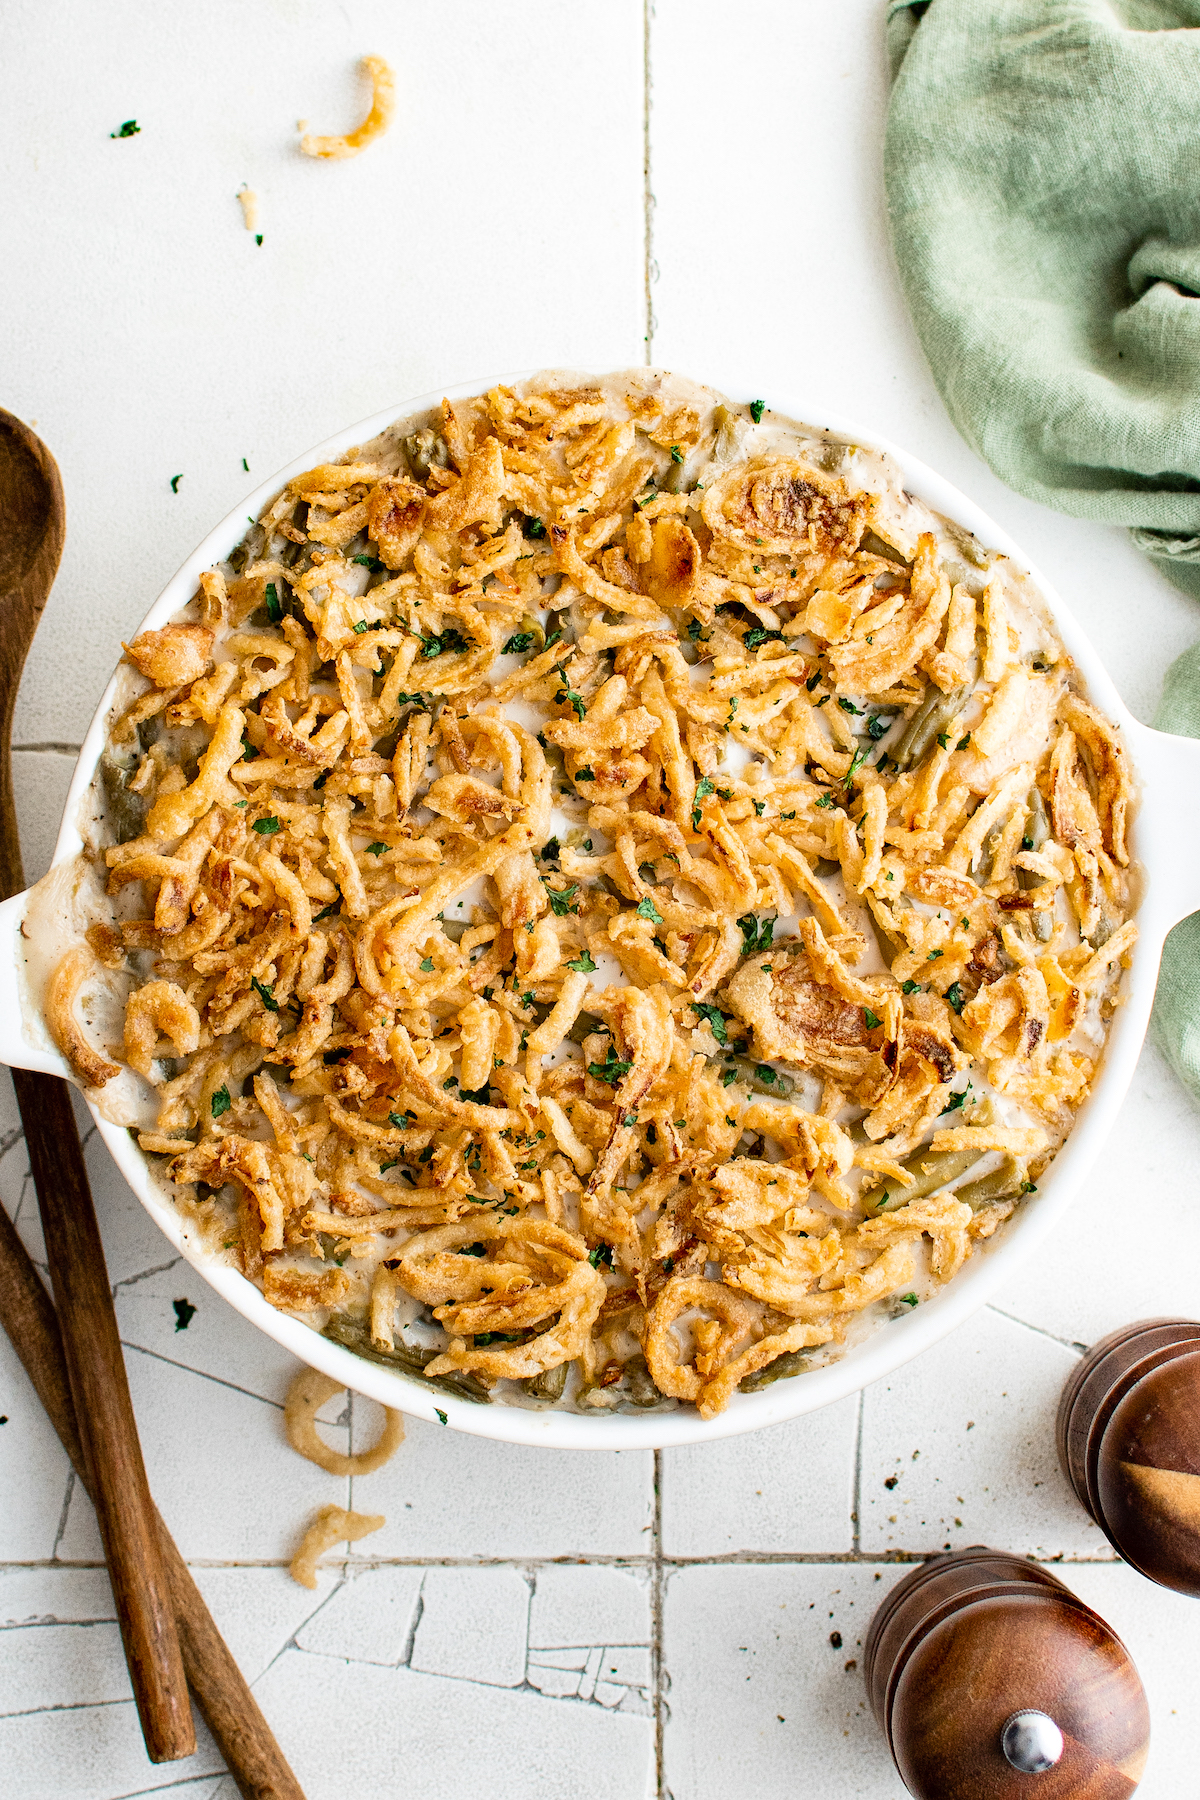 Classic green bean casserole with canned green beans in a round casserole dish topped with french fried onions on top.